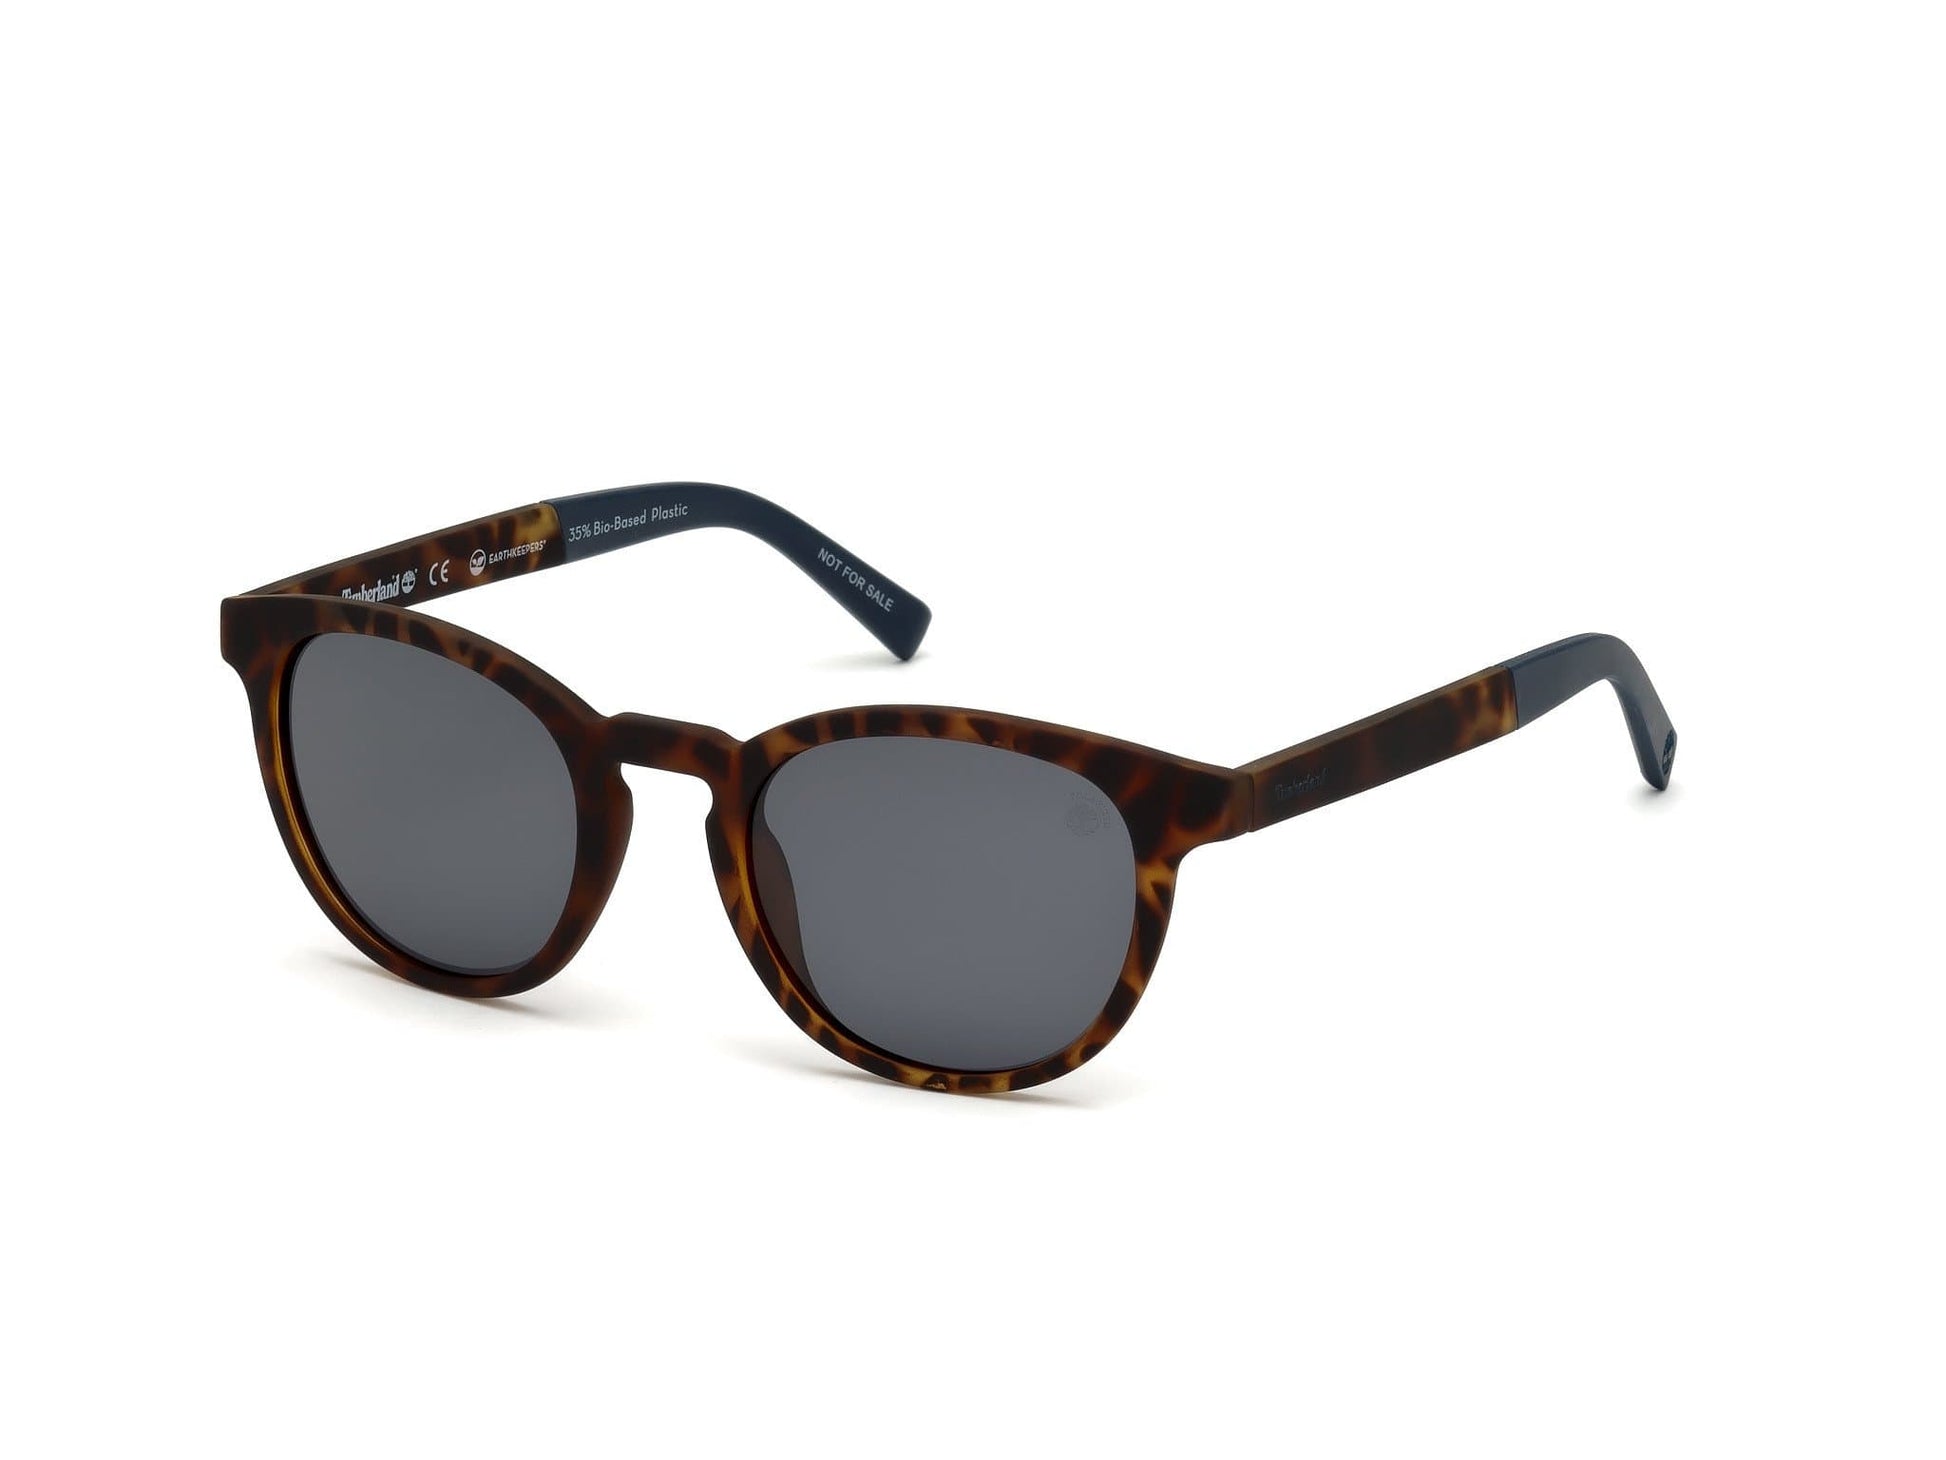 Timberland TB9128 Round Sunglasses 52D-52D - Rubberized Tortoise Frame & Temples With Blue Rubber / Blue Lenses